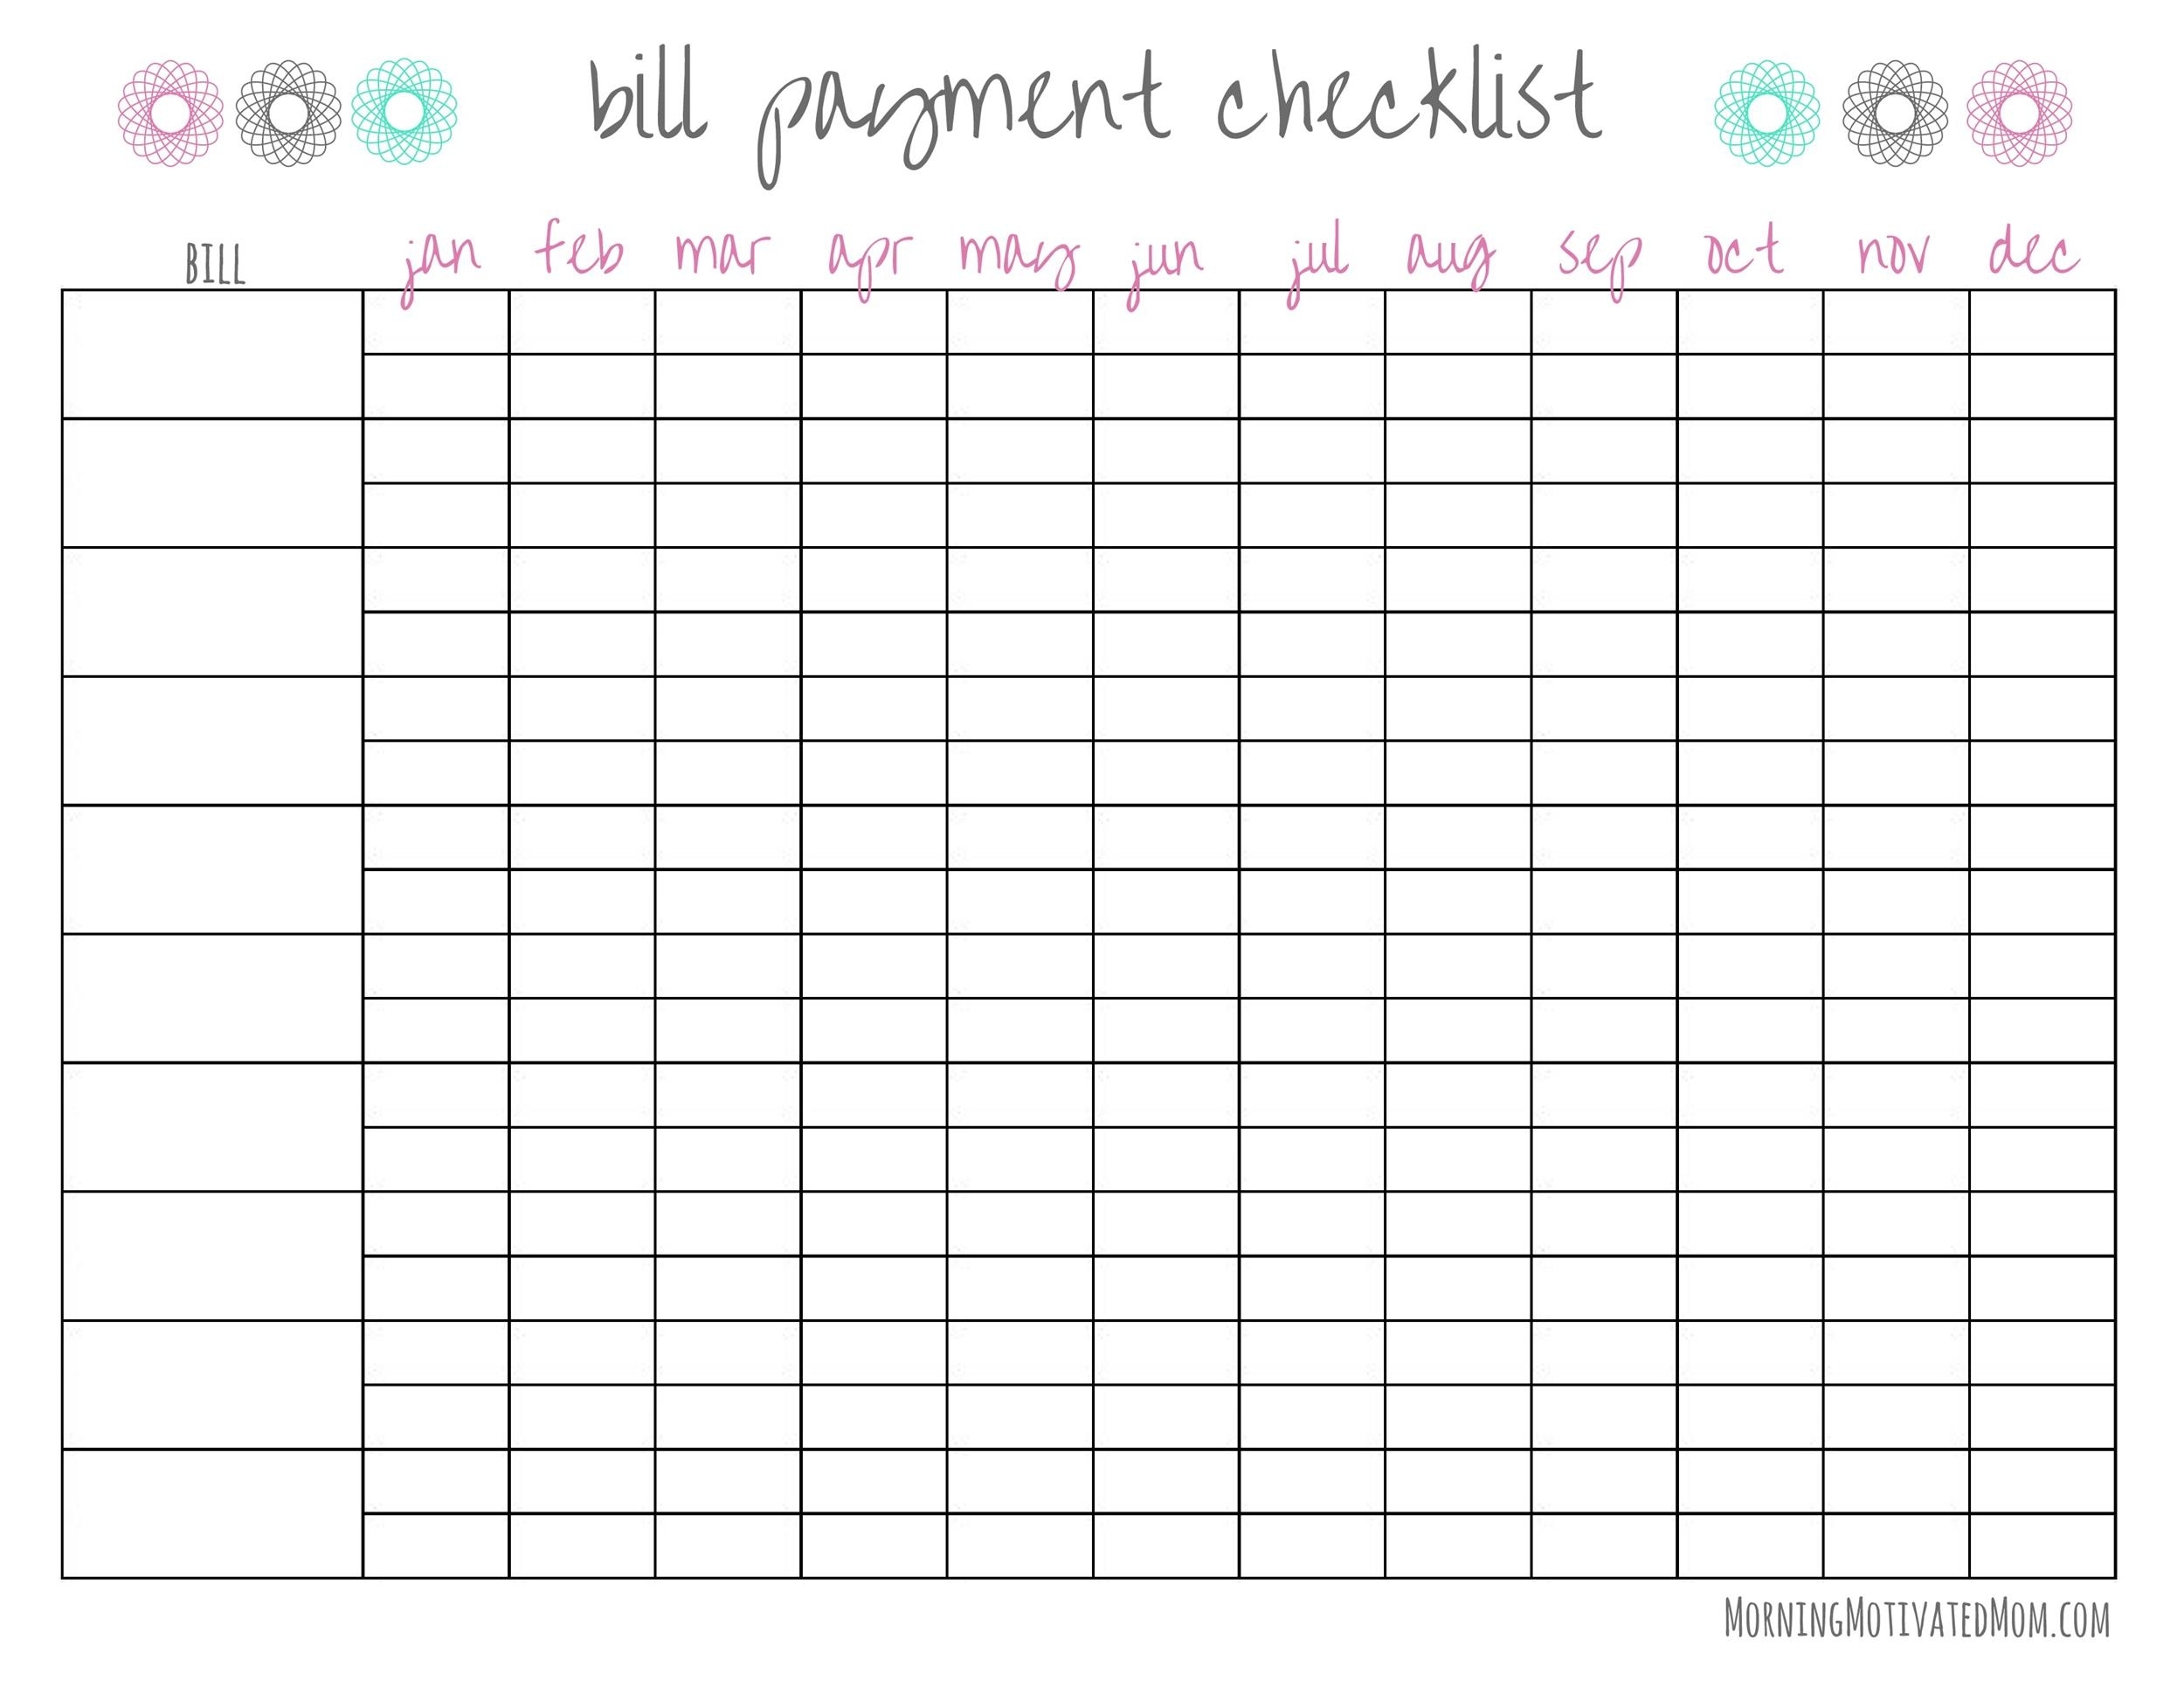 Get Monthly Bill Payment Log